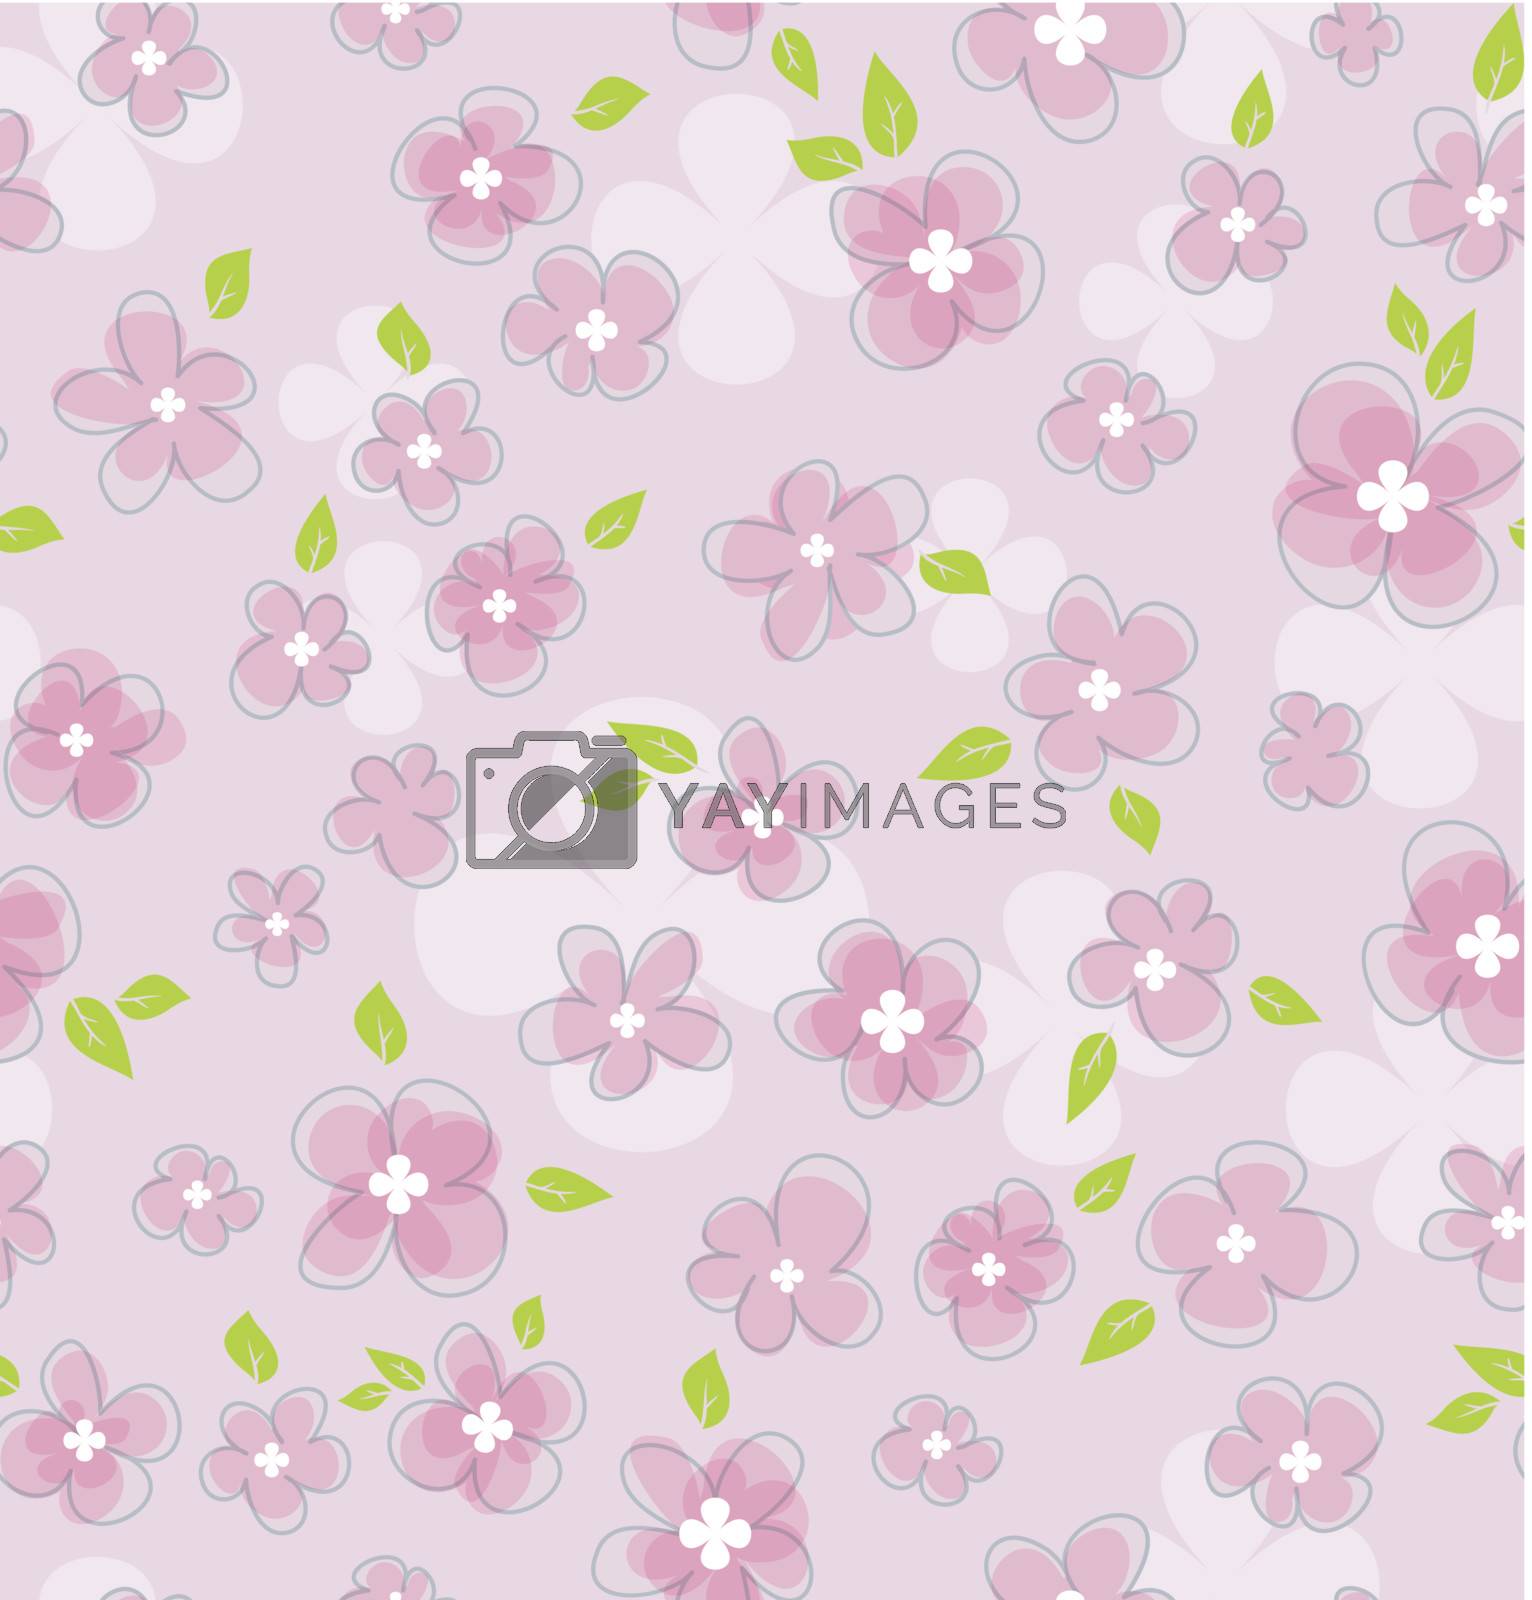 Royalty free image of Floral seamless pattern  by SonneOn